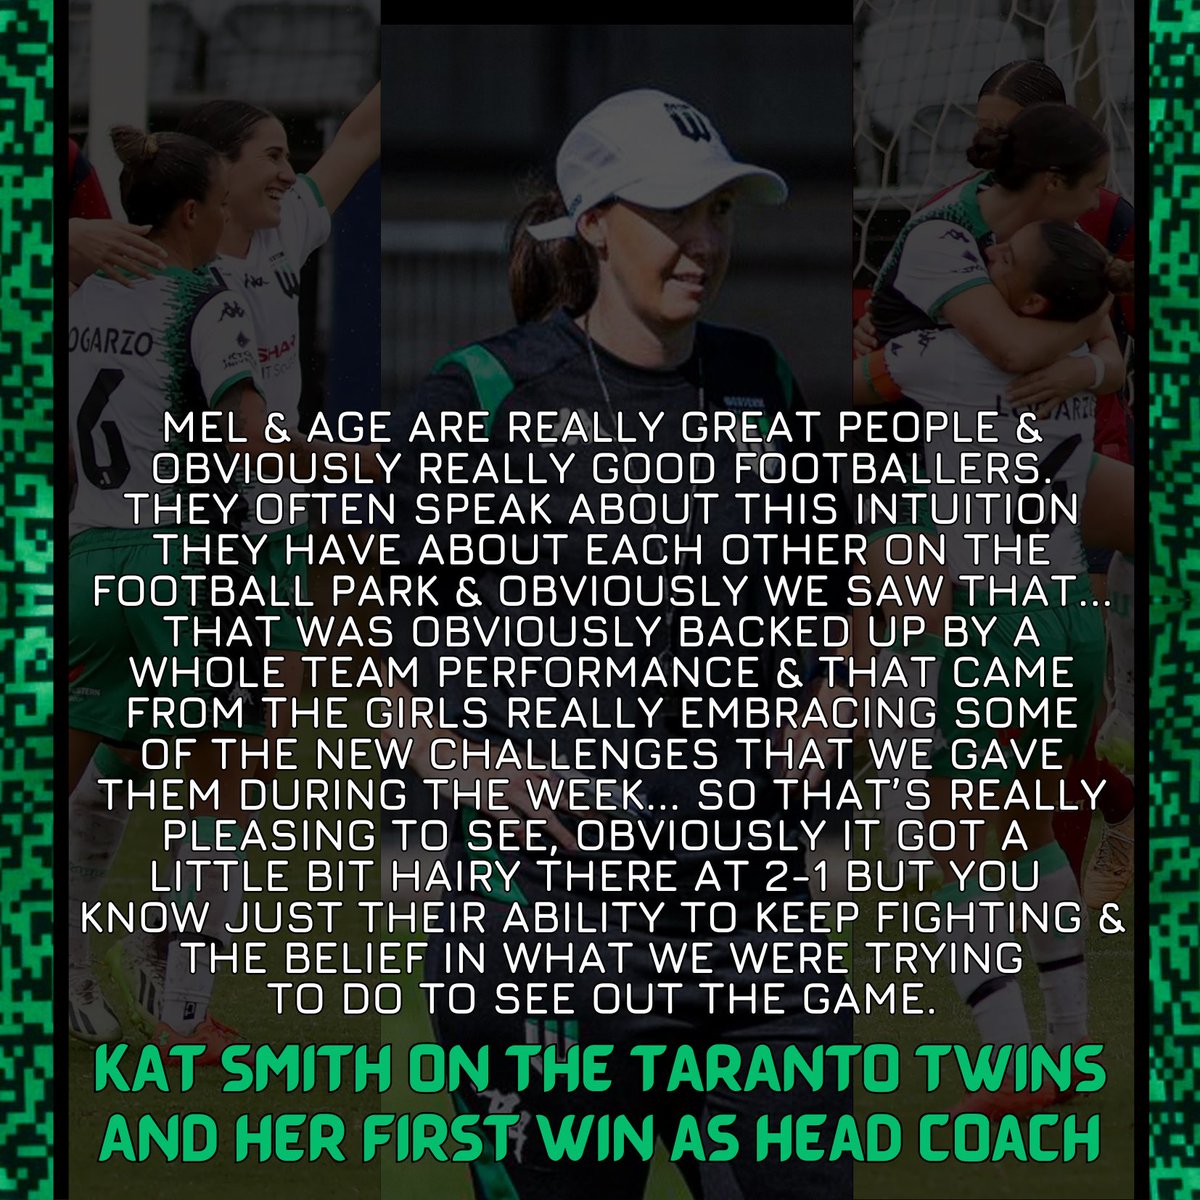 It was a great win on the road last weekend & @Kat_Smith_7 spoke so highly about the team on DubZone afterwards.

The Kat Smith era started on a brilliant note & no doubt there are many more magnificent performances like that one to come as the team continue to grow together 💚🖤